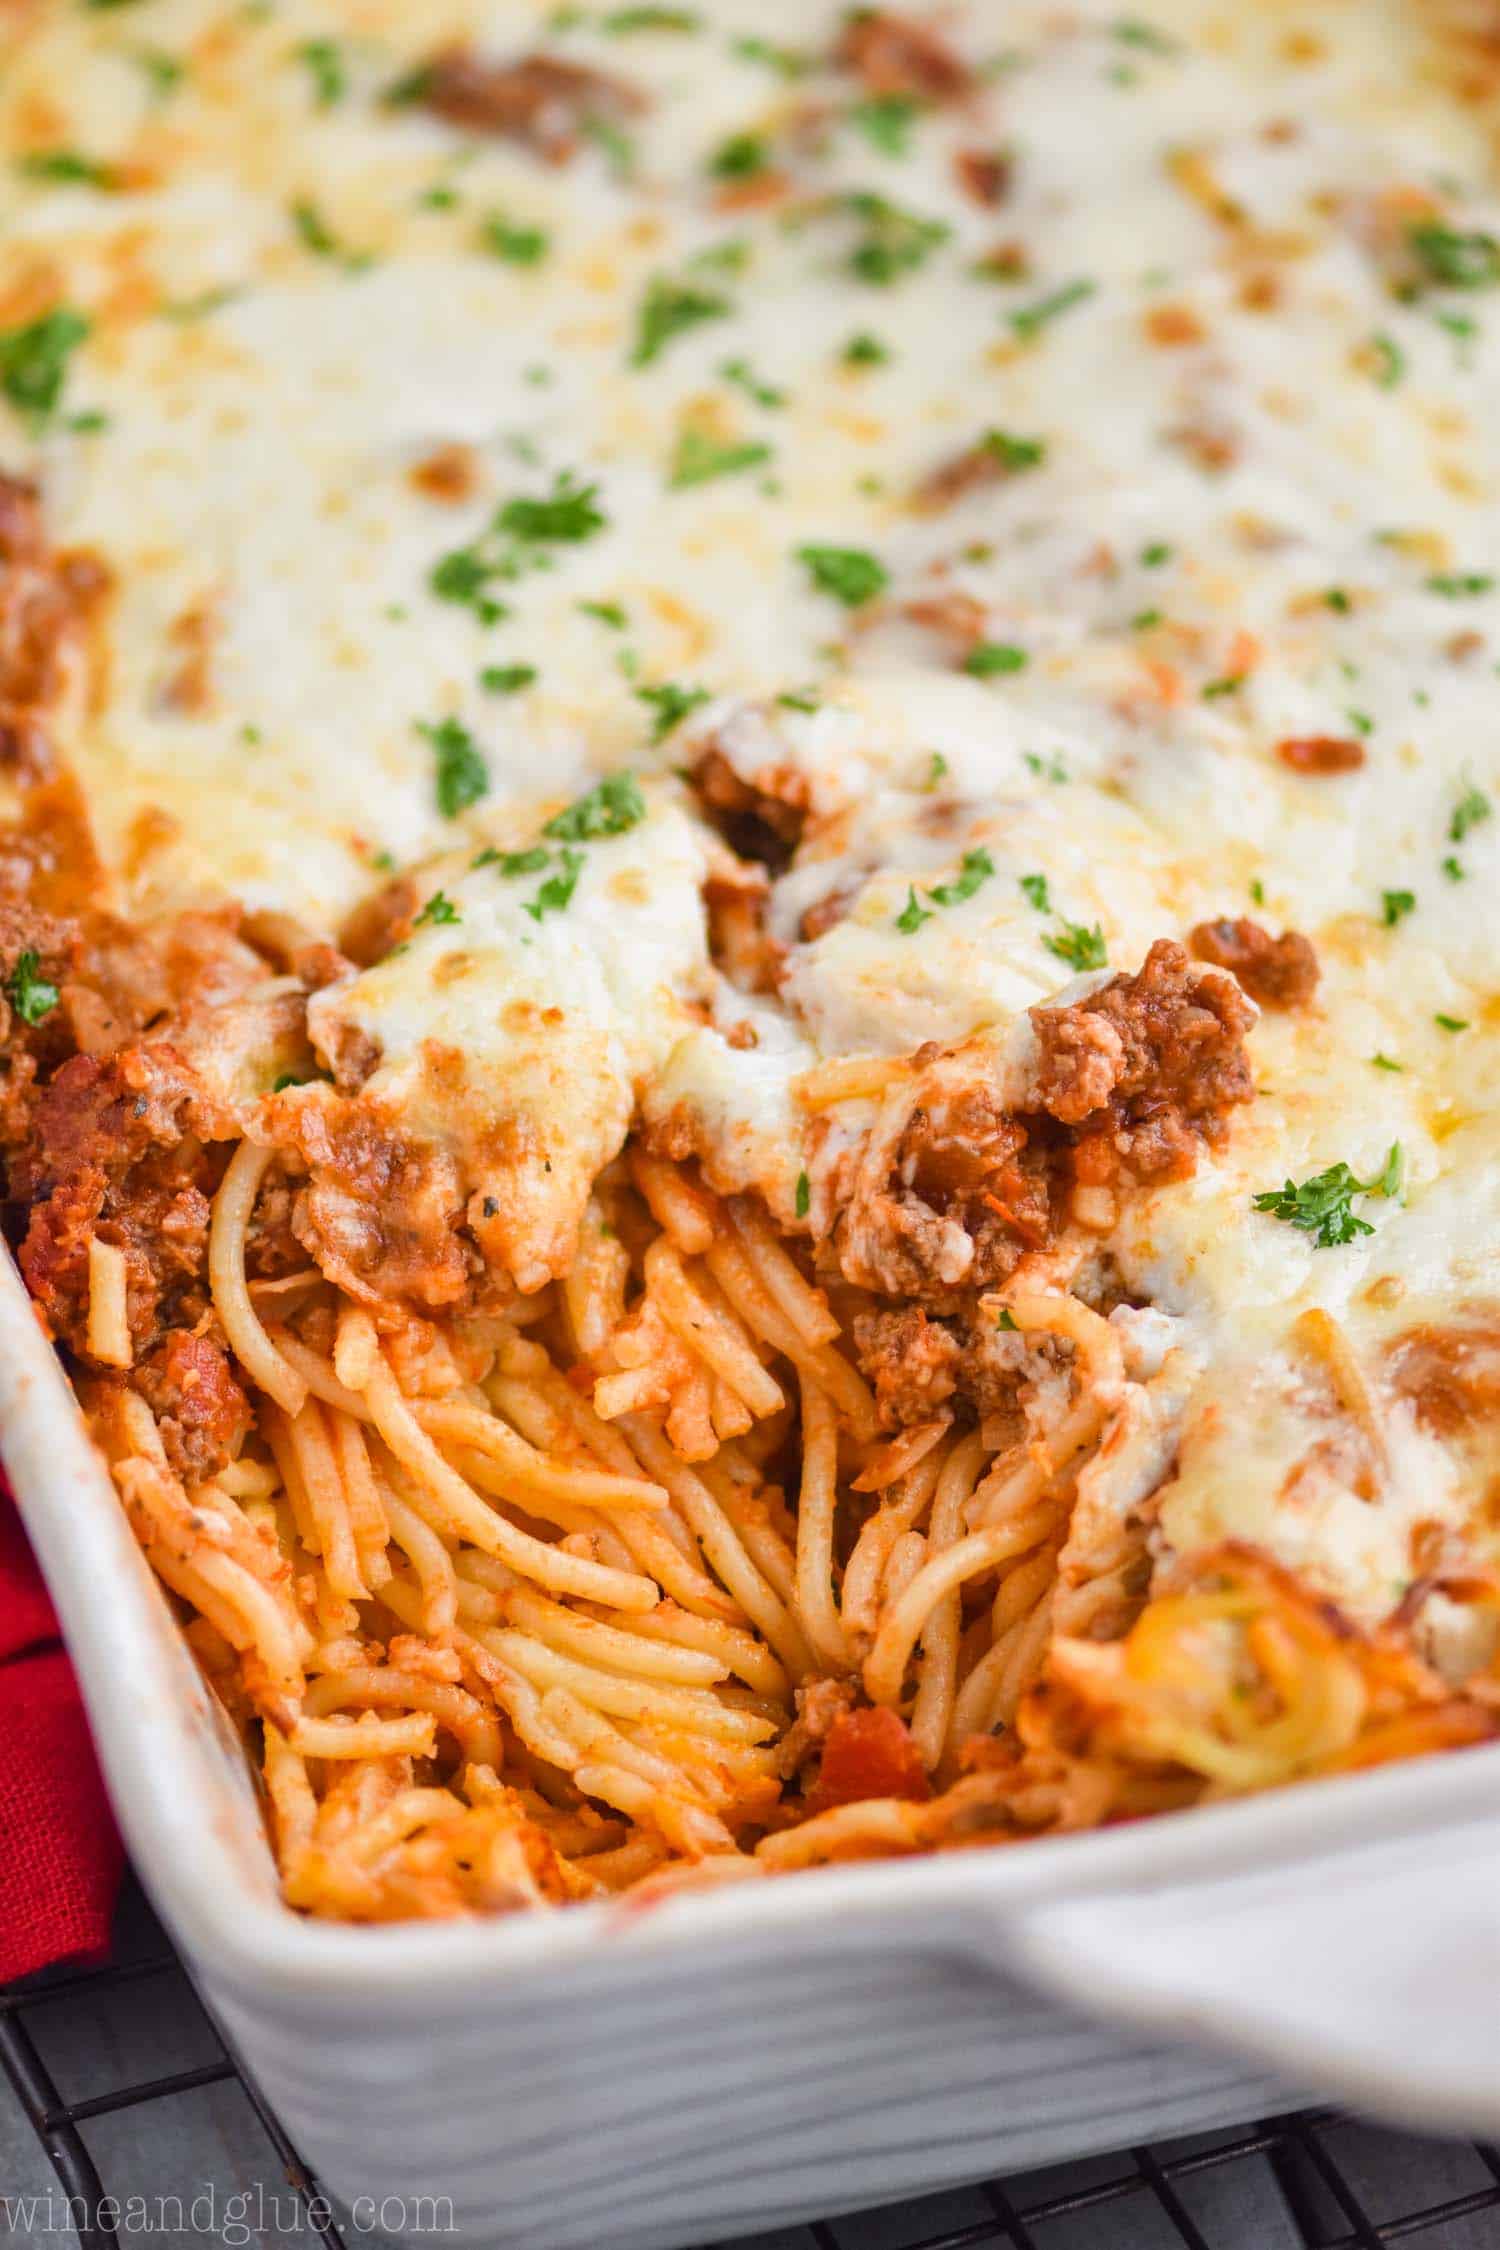 Pictures Of Baked Spaghetti - Diary